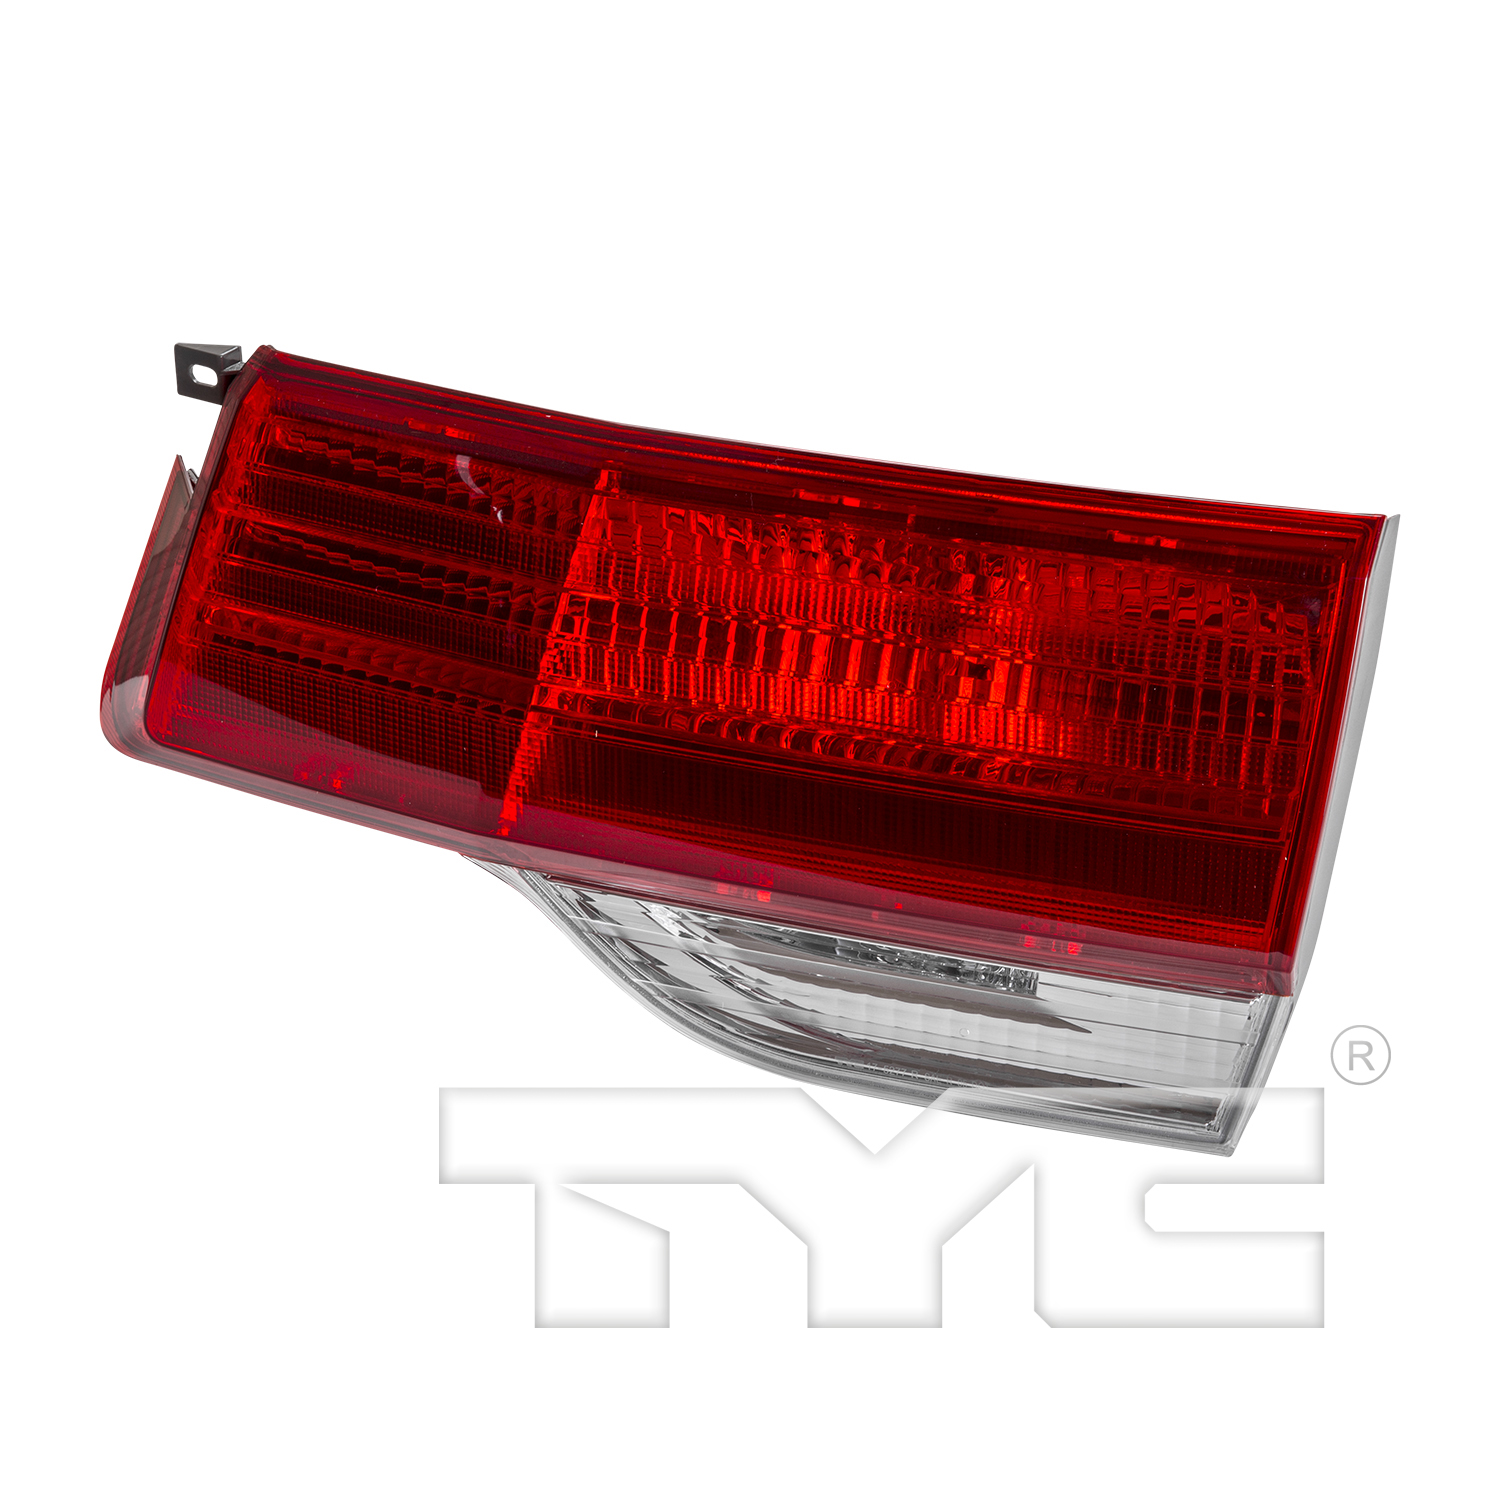 Aftermarket TAILLIGHTS for HONDA - ODYSSEY, ODYSSEY,08-10,RT Taillamp assy inner